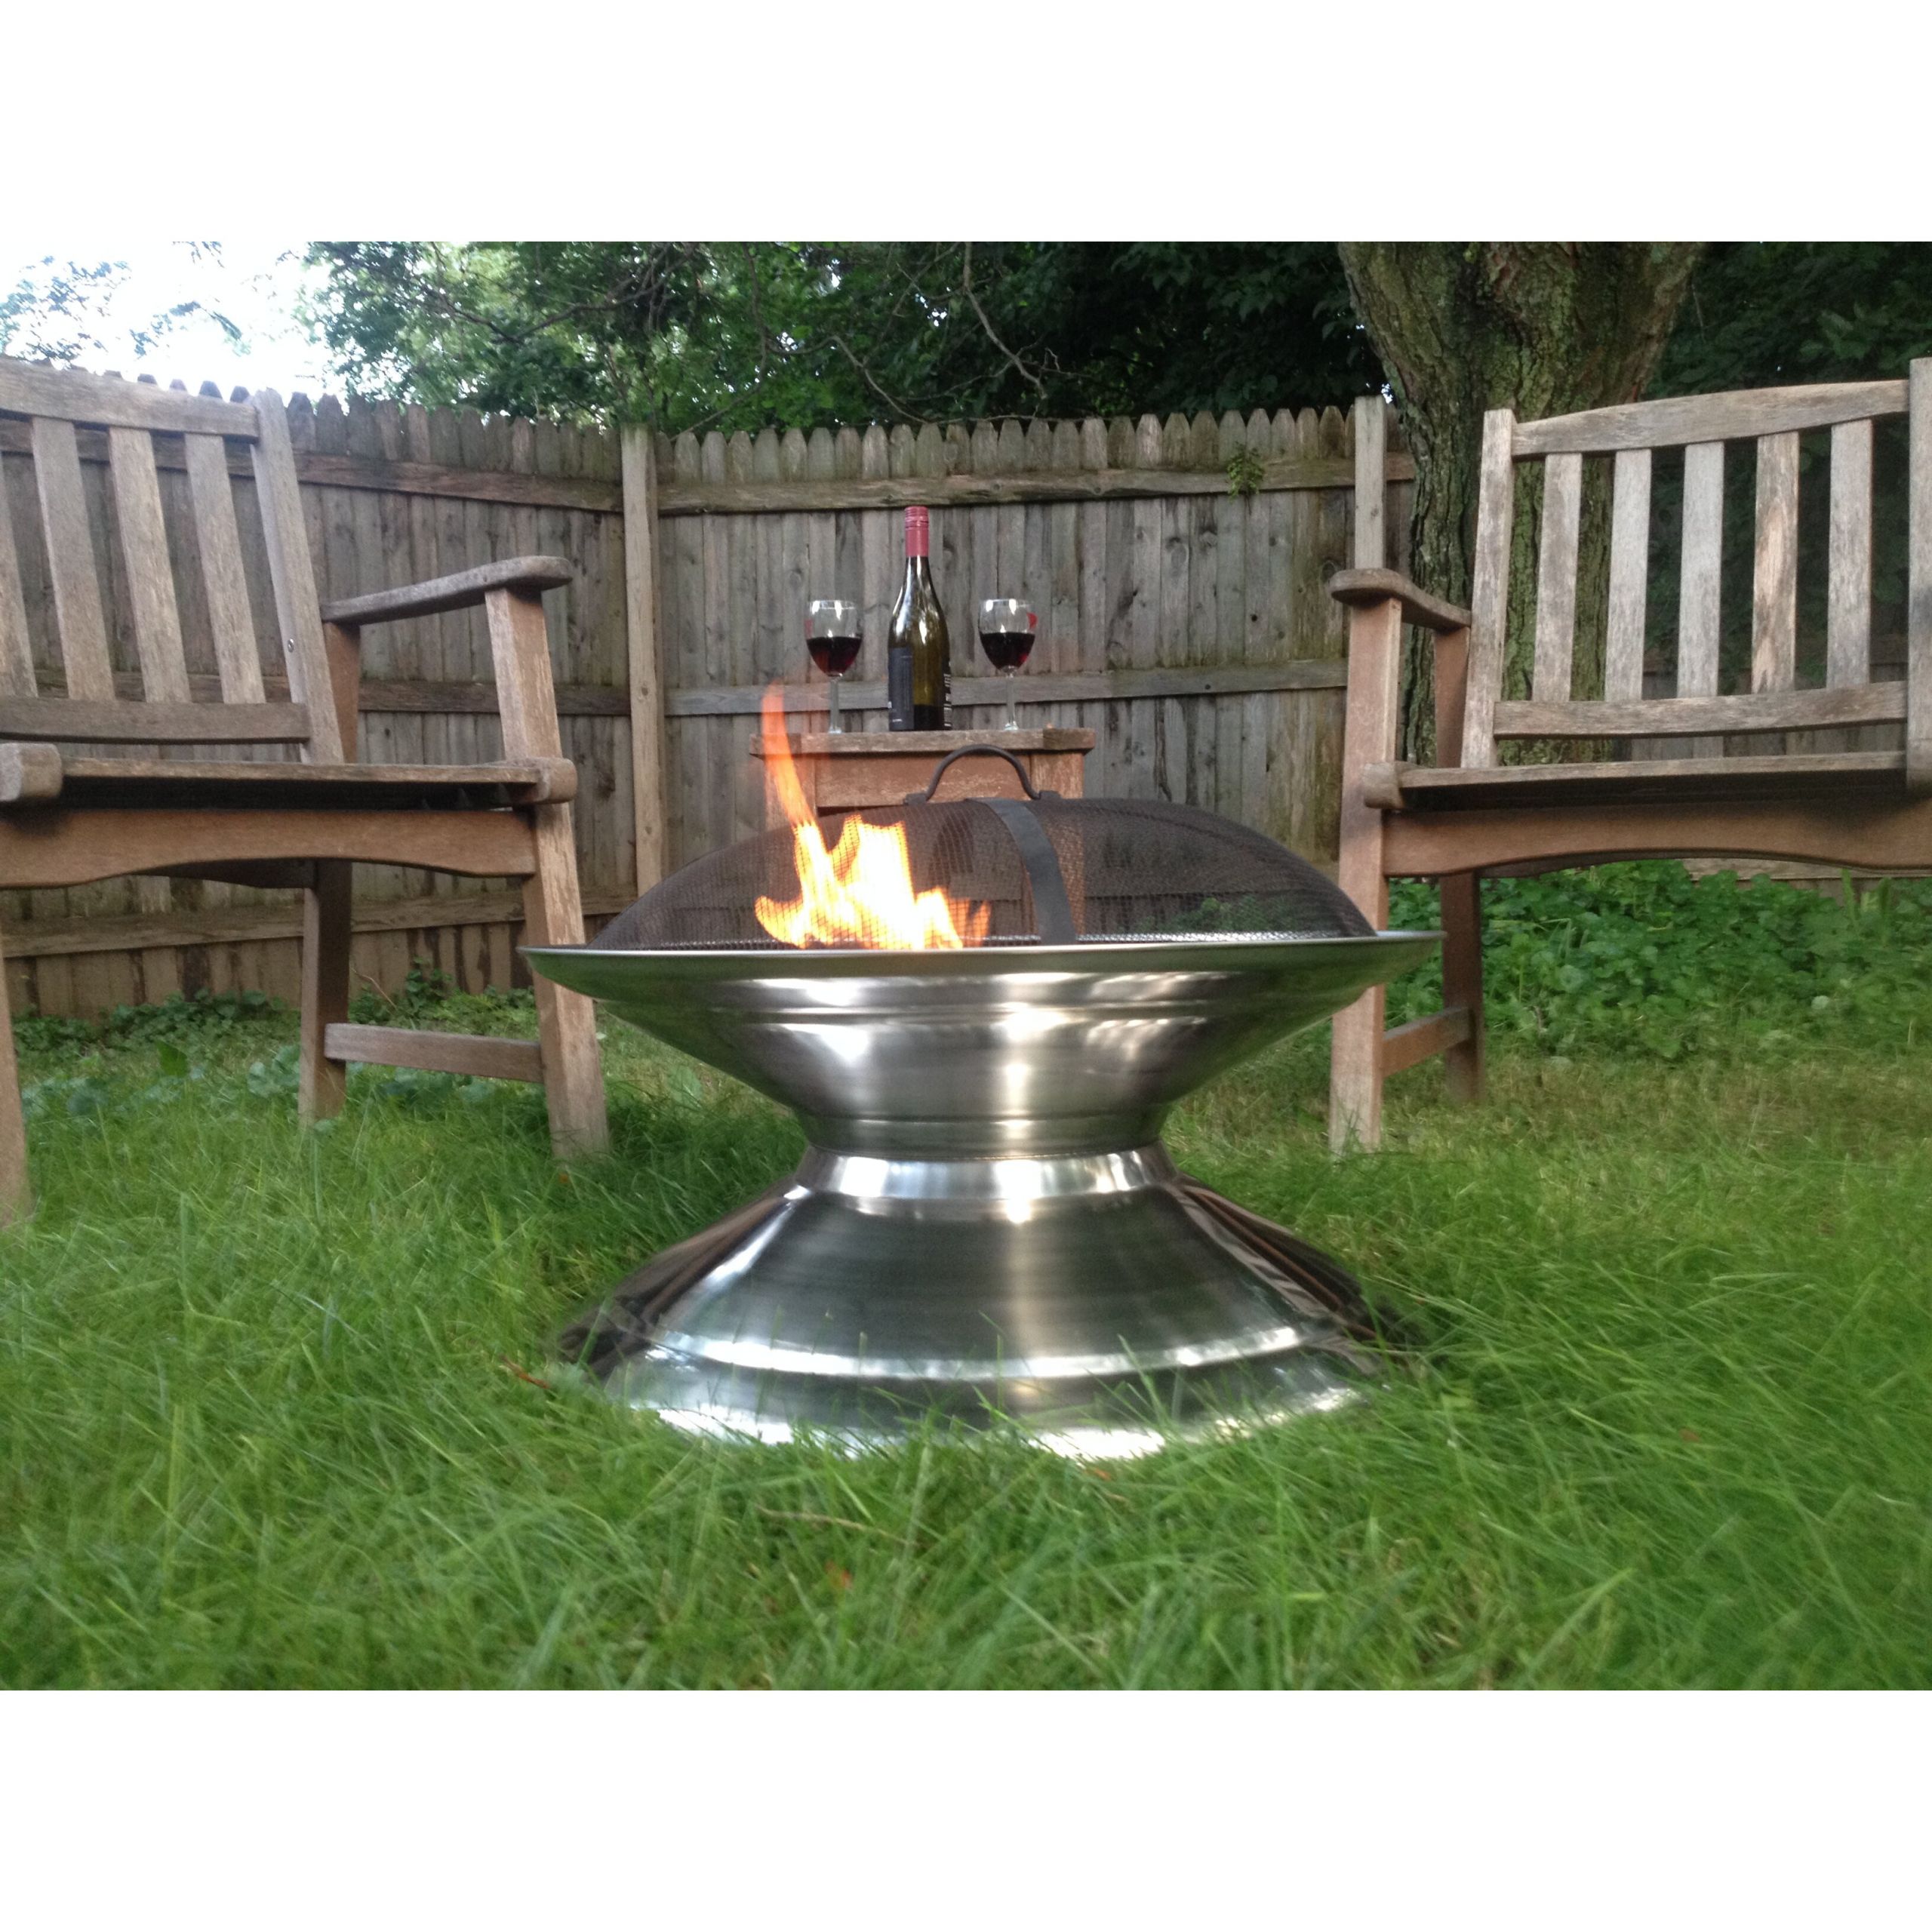 Stainless Steel Firepit
 Pomegranate Solutions Stainless Steel Outdoor Fire Pit